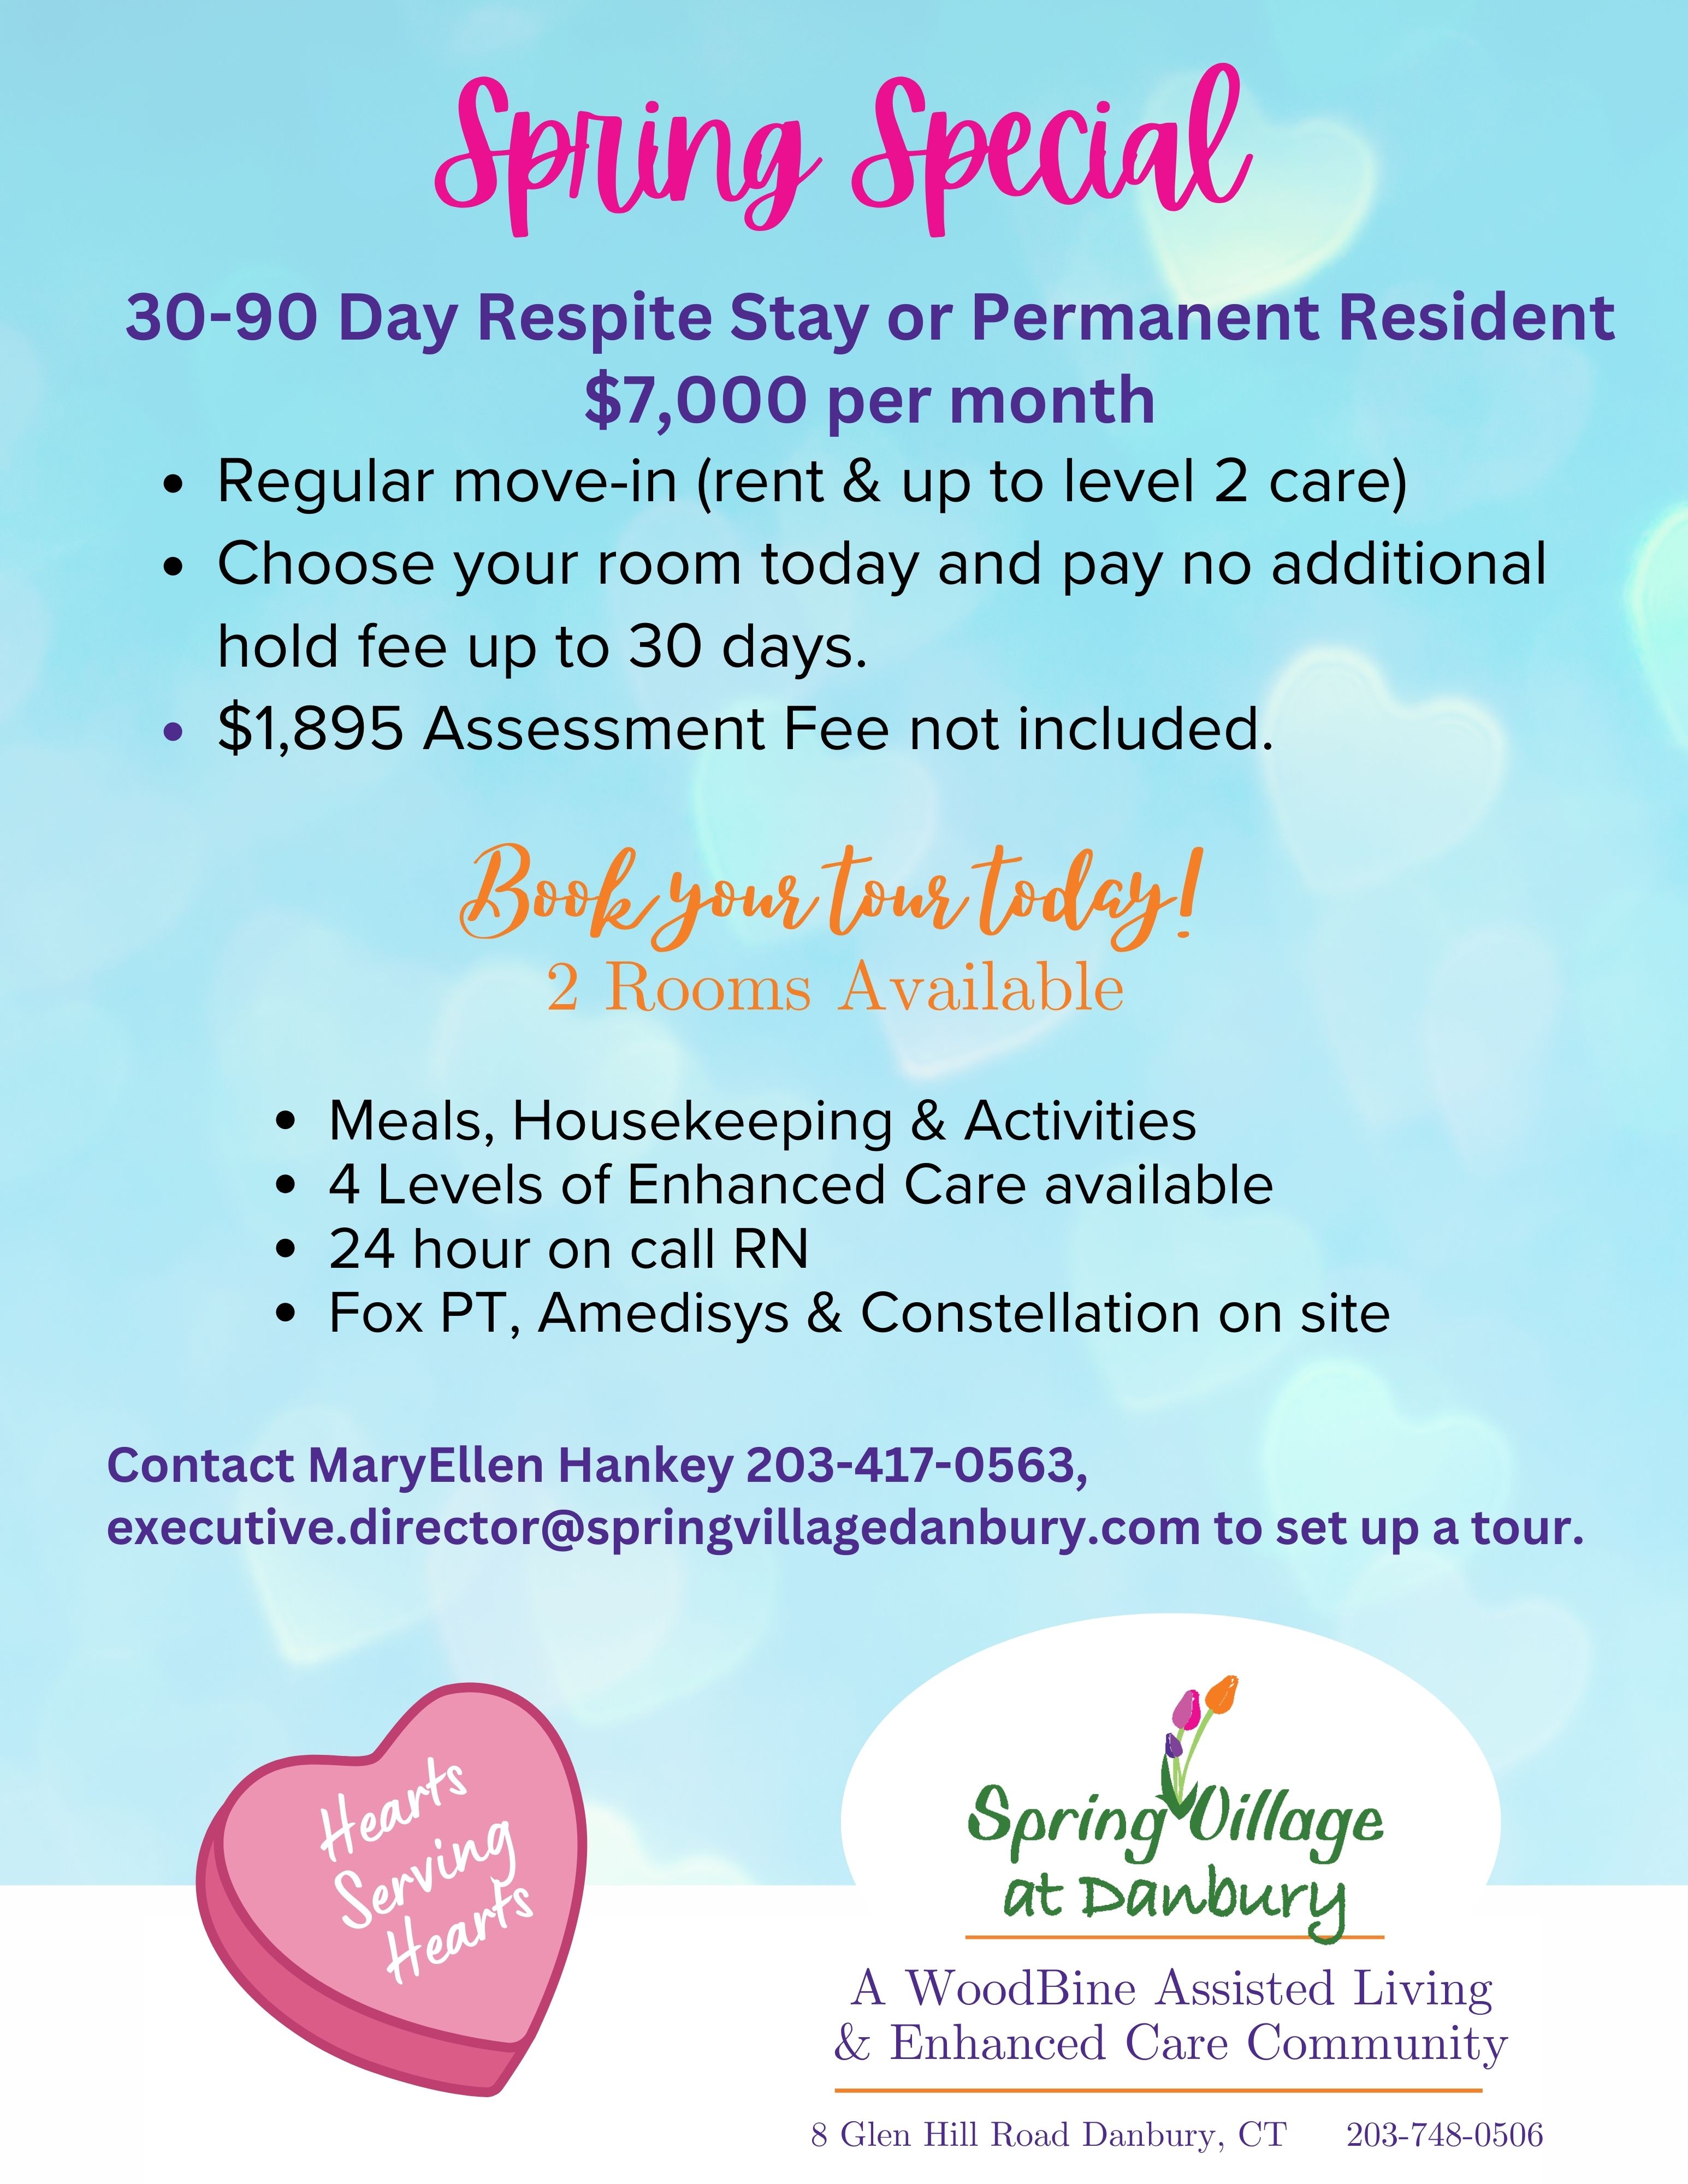 Take Advantage of Our Spring Room Special While it Lasts!